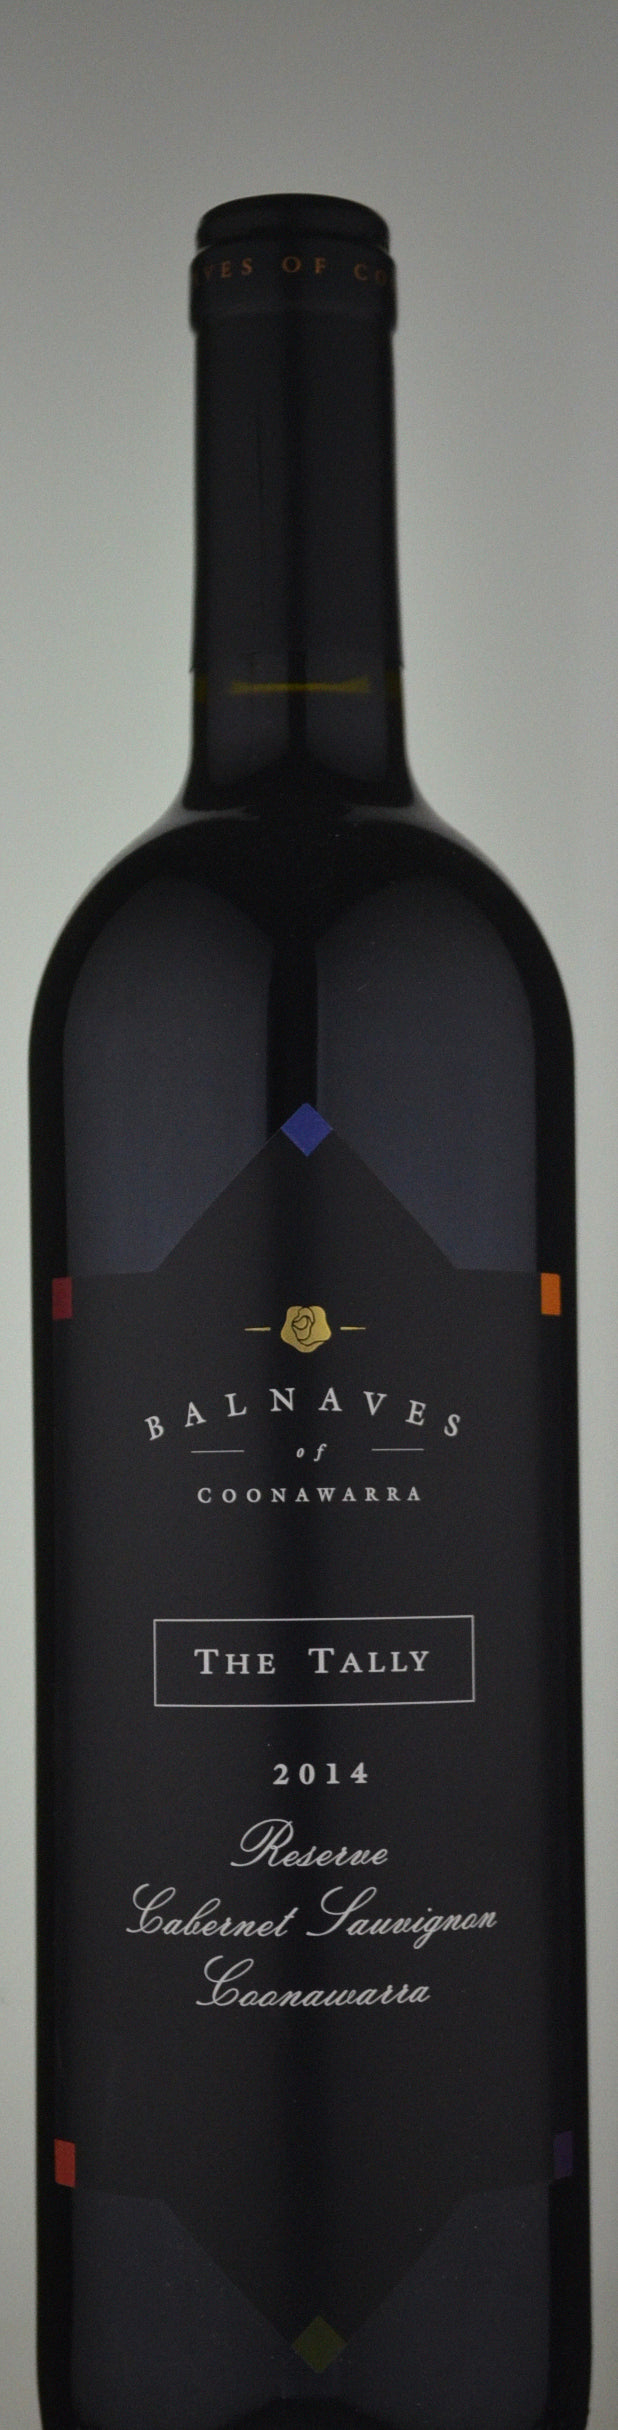 Balnaves of Coonawarra The Tally Reserve Cabernet Sauvignon 2014